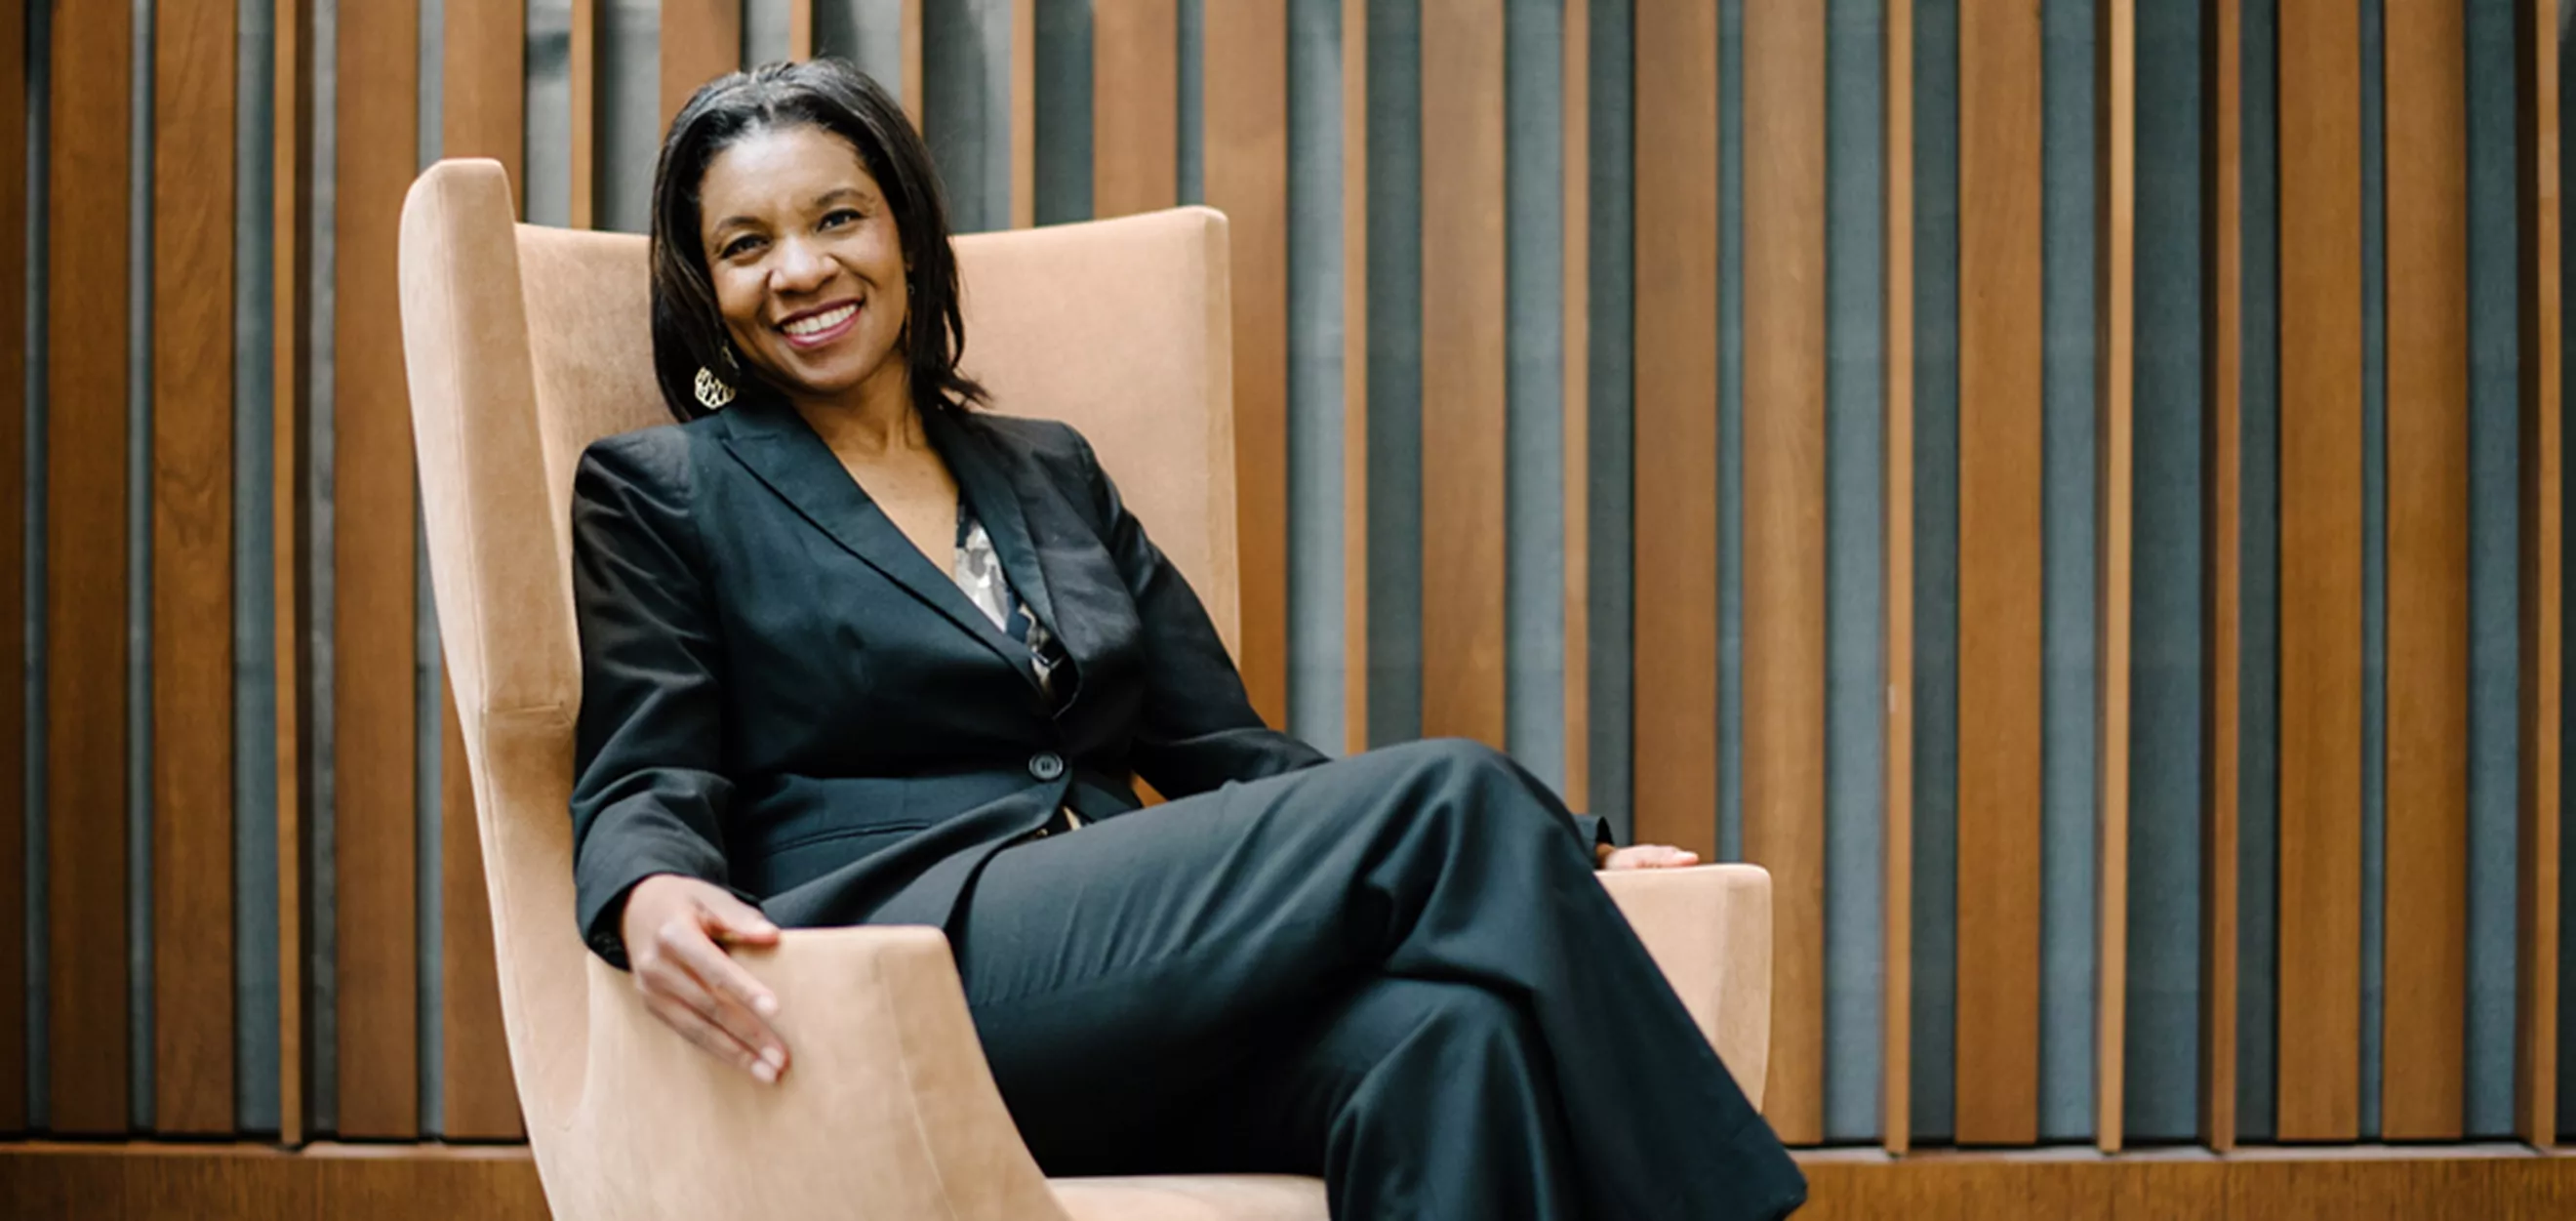 Erika George reclined in a comfortable chair in professional attire